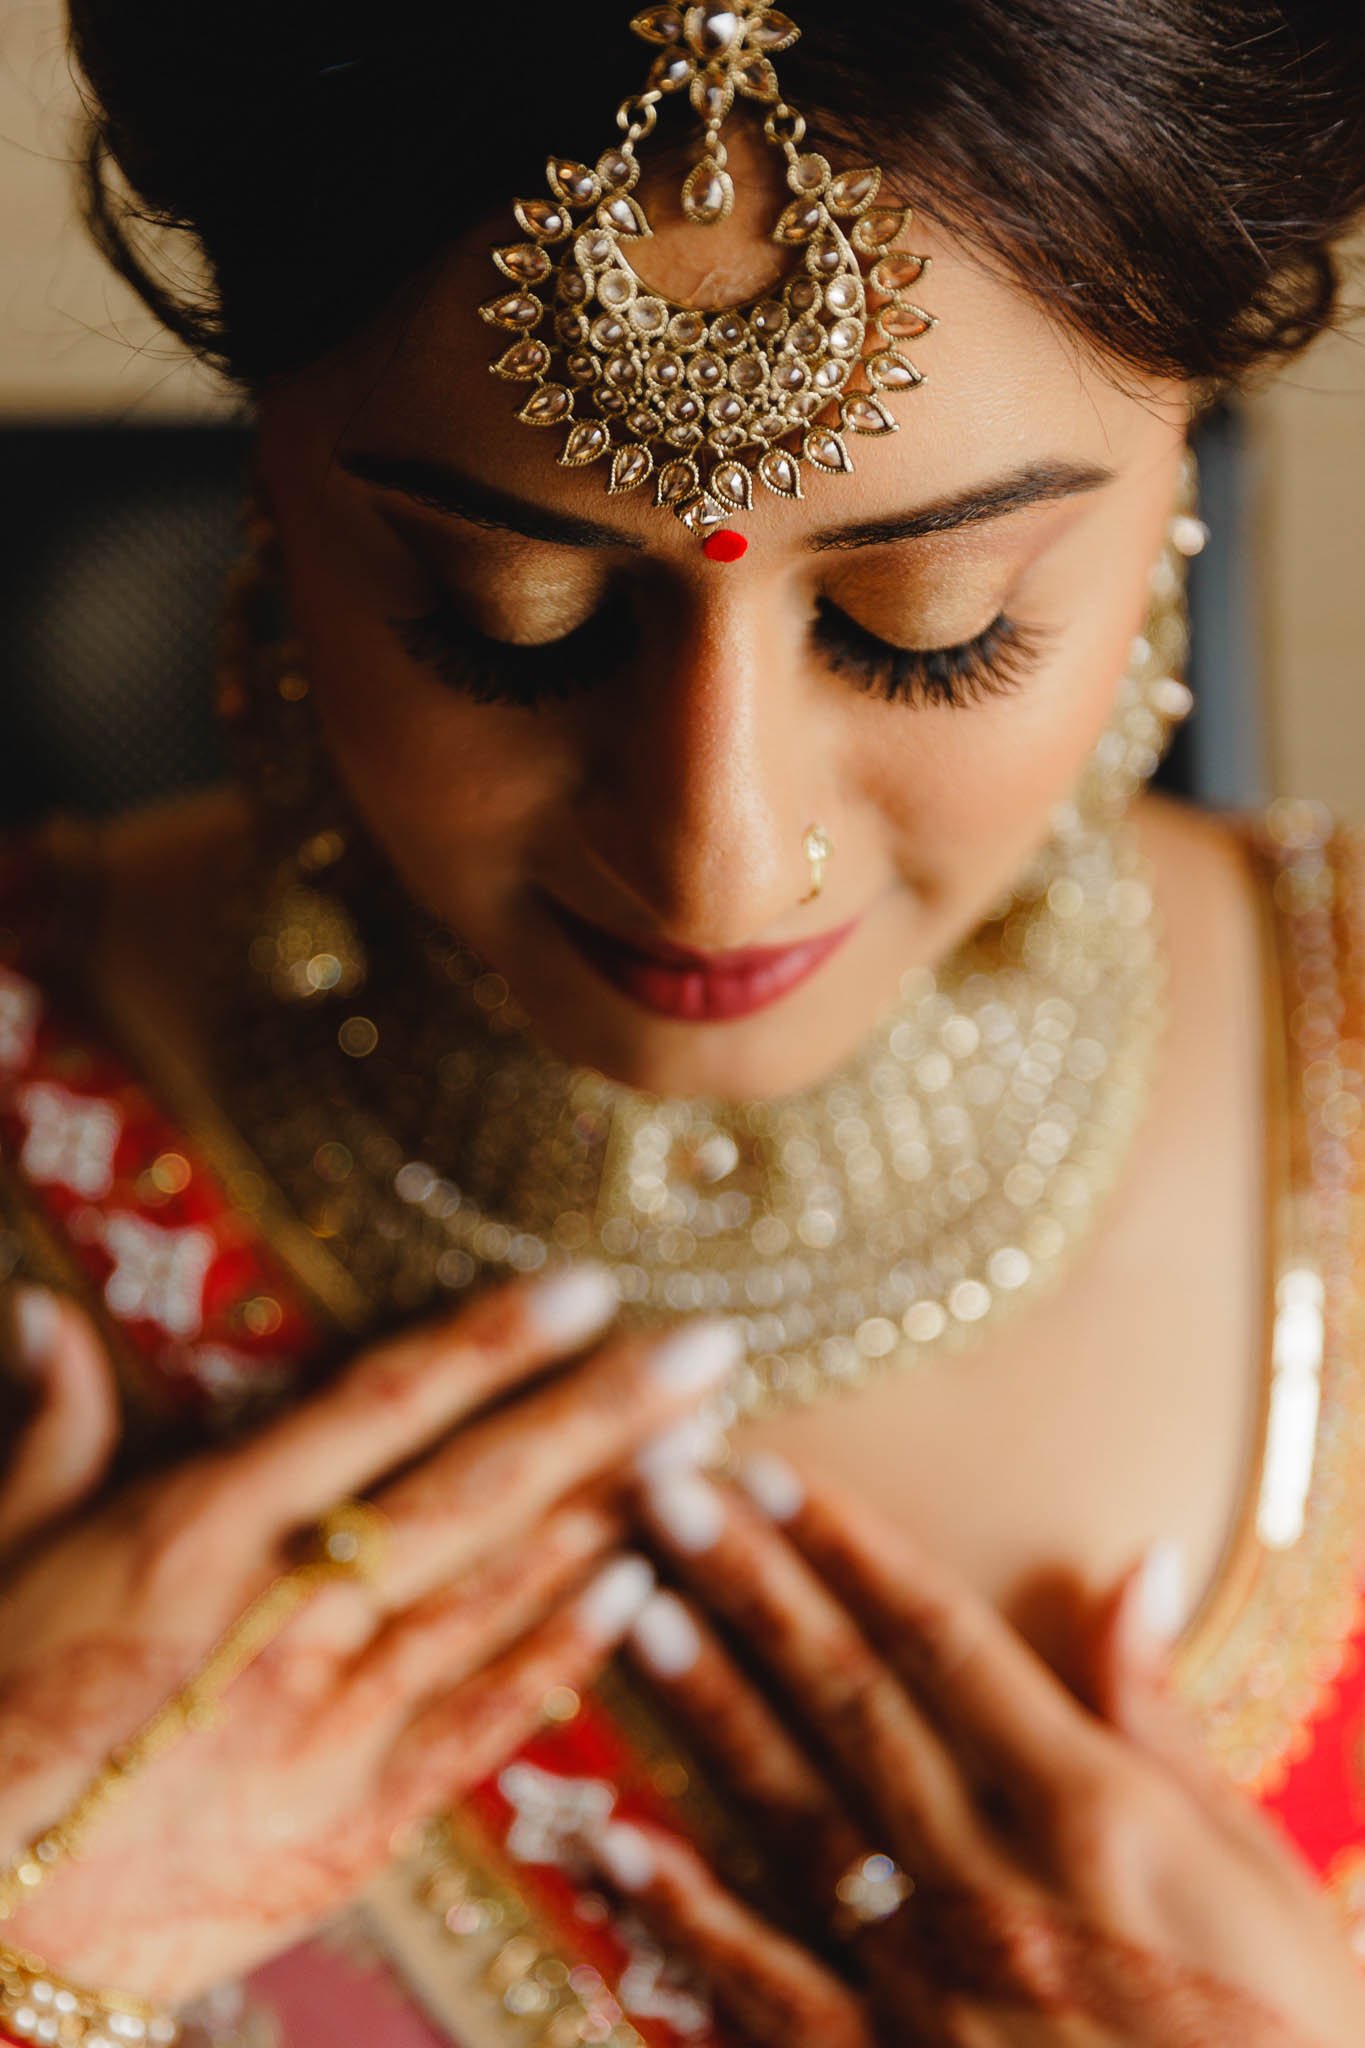  Artistic pose Idea for Indian bride getting ready session  